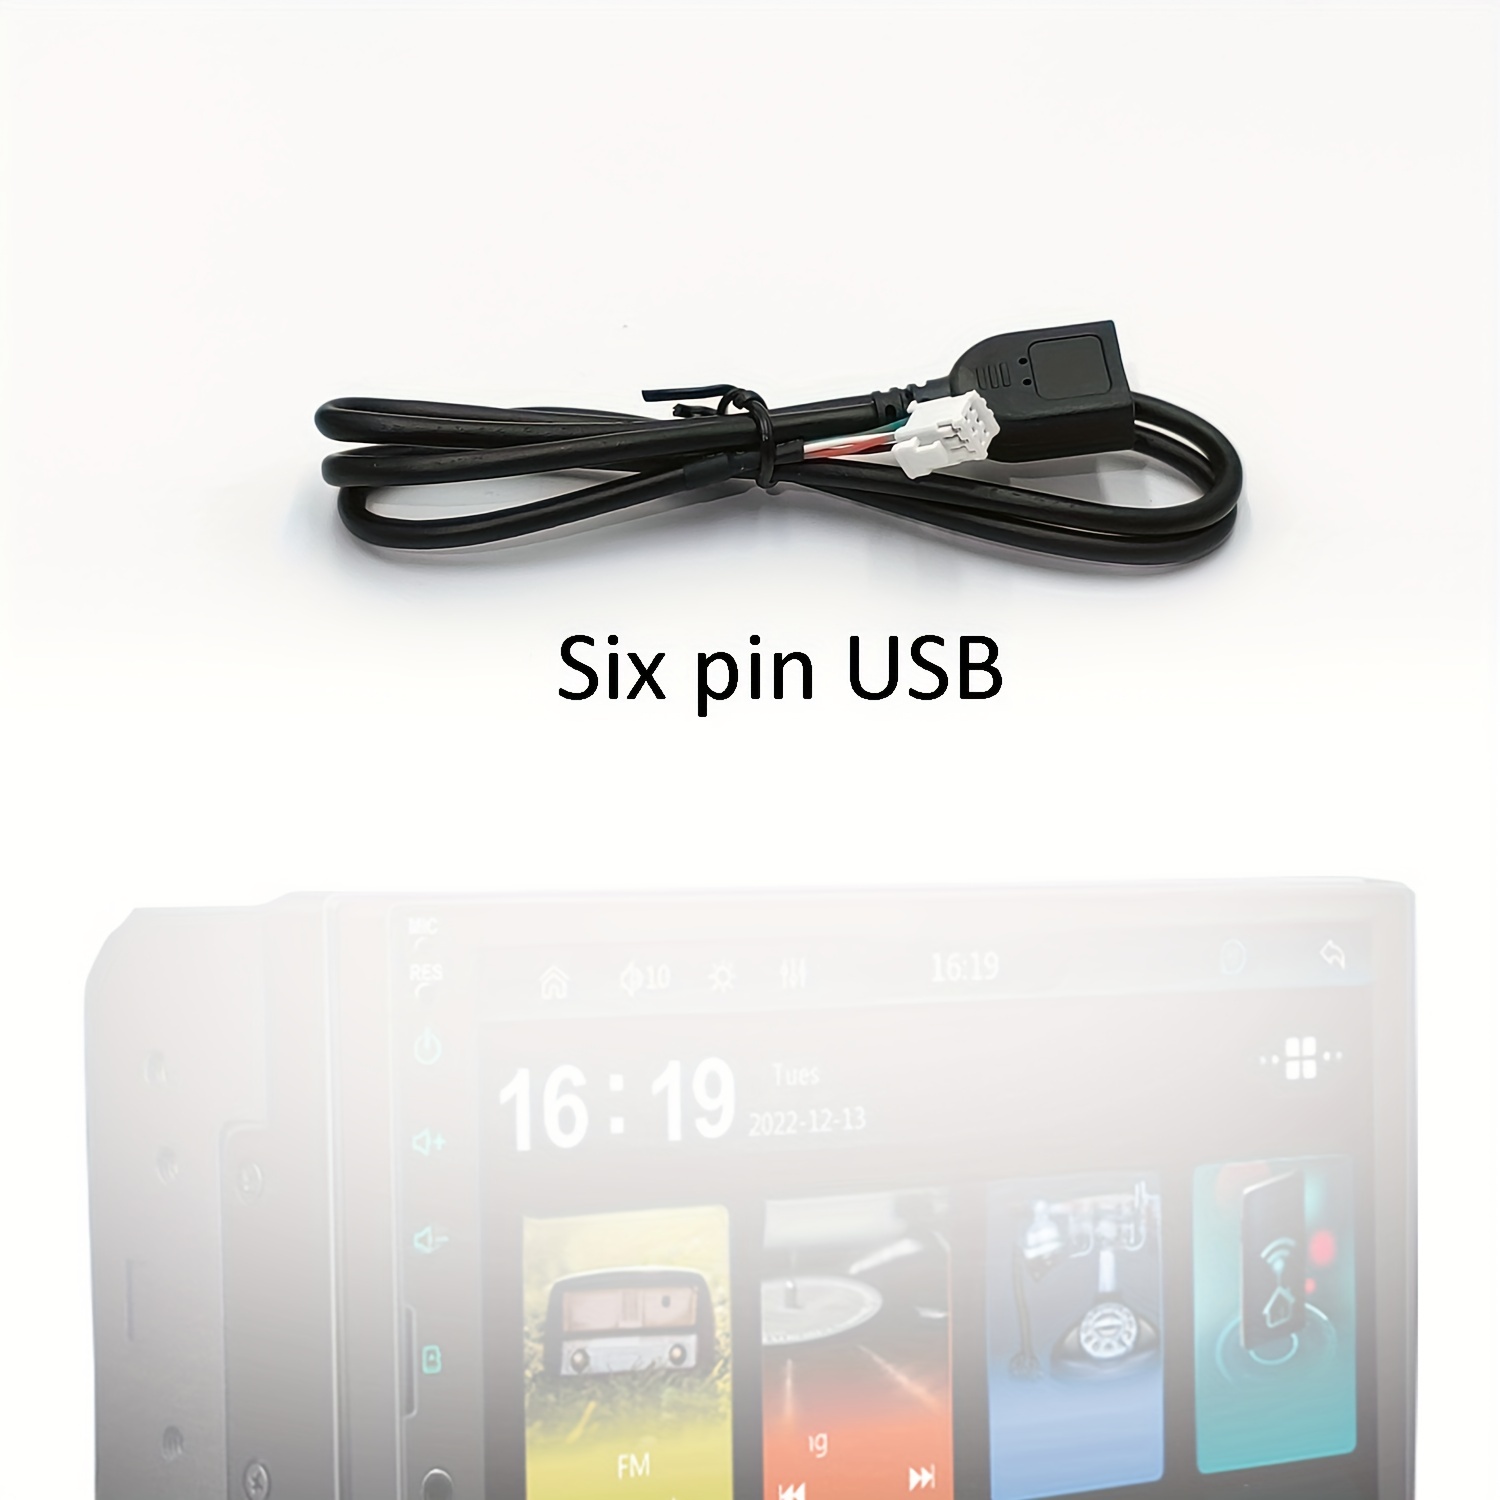 Car Center Control Dashboard, Android Machine Large Screen Navigation 6 Pin  USB Data Connection Cable